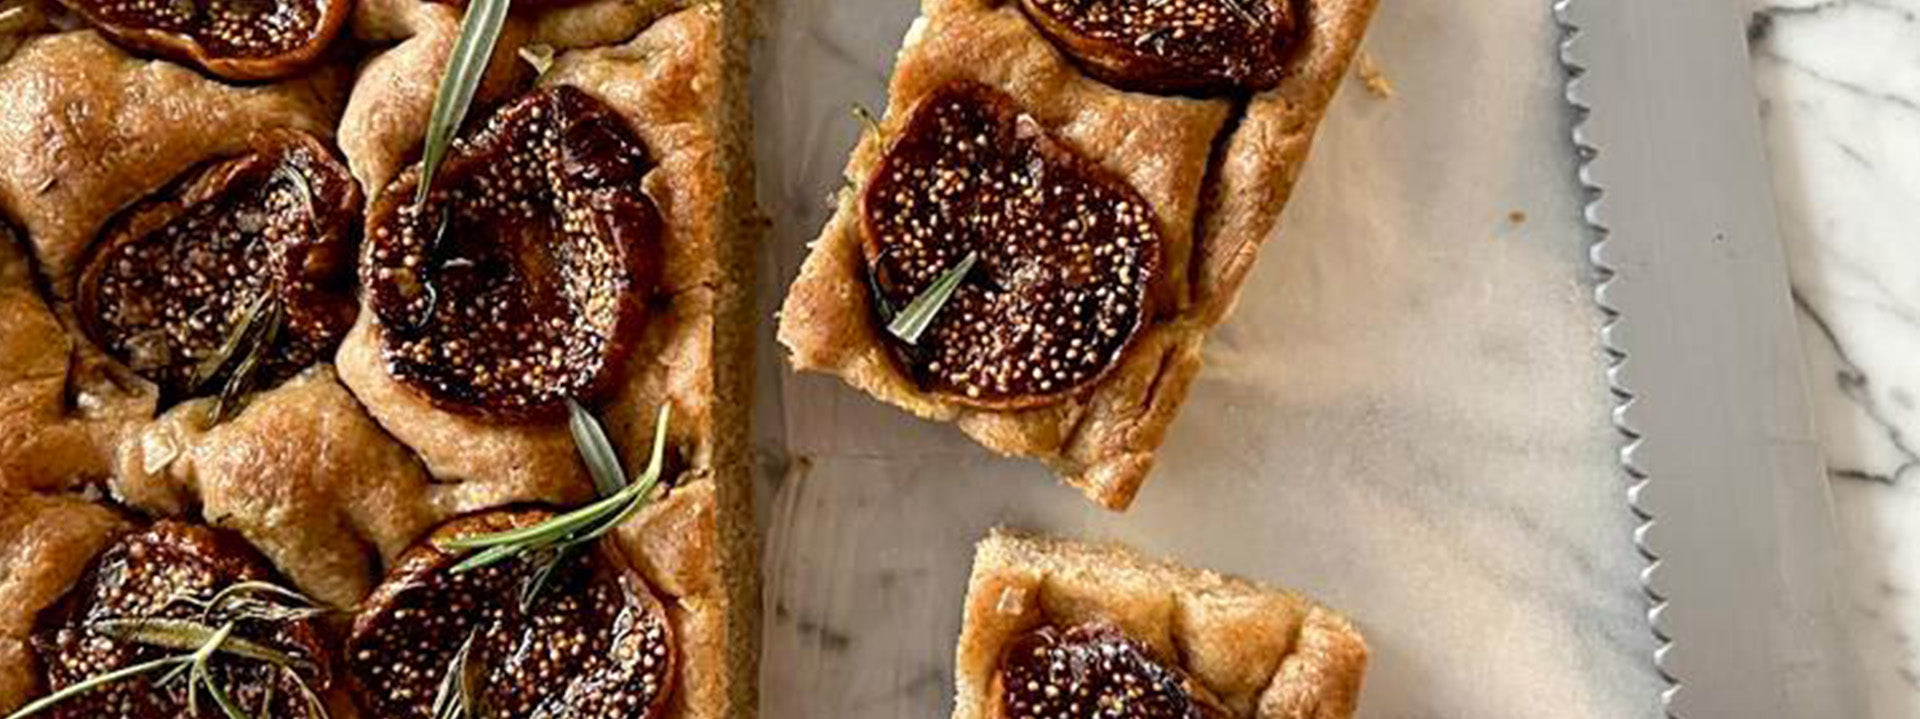 WHOLE WHEAT FOCACCIA WITH DRIED FIGS AND ROSEMARY